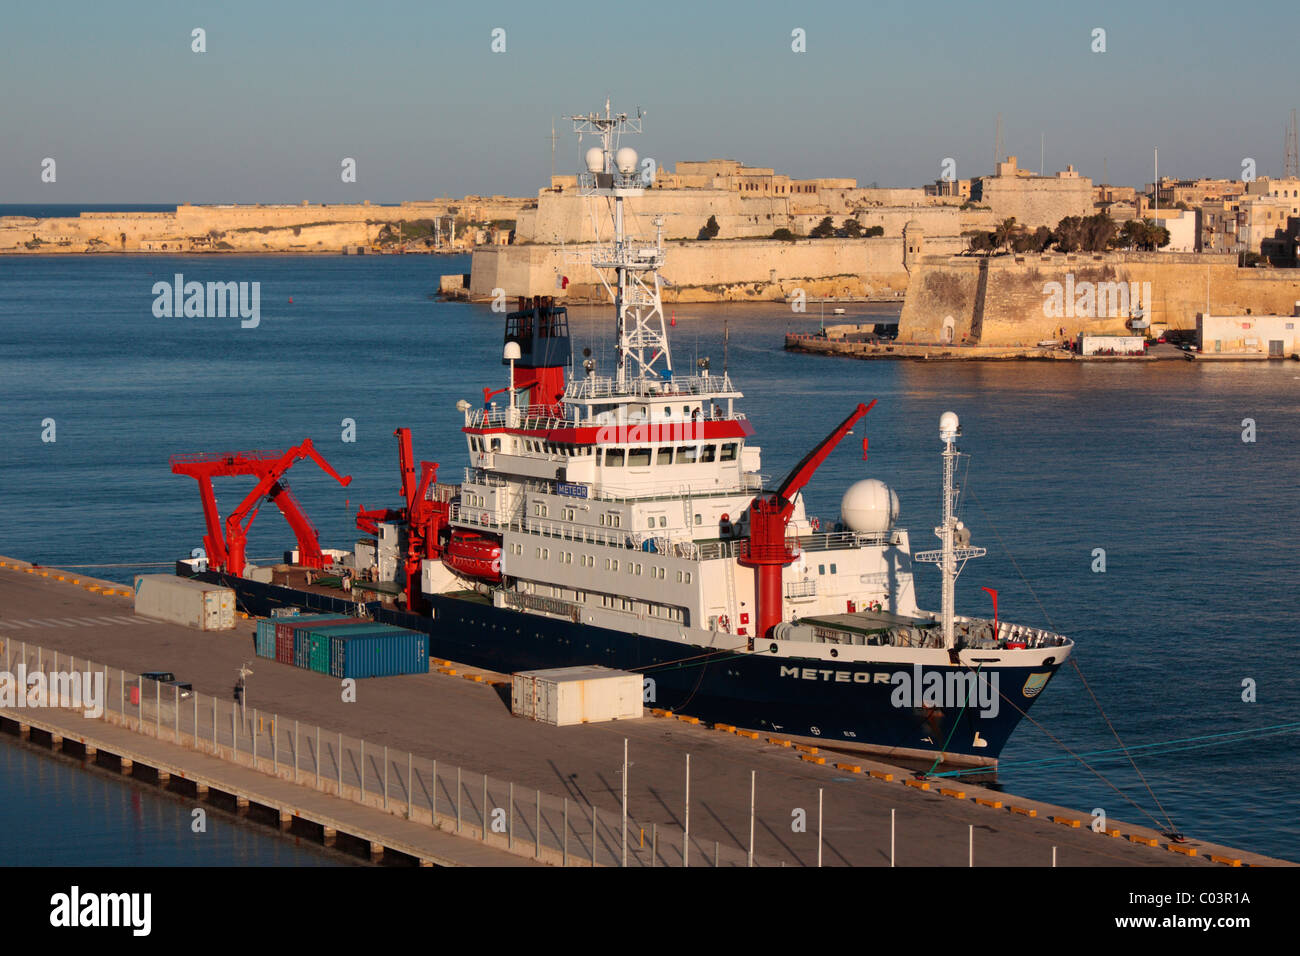 The research and survey vessel Meteor in Malta's Grand Harbour Stock Photo